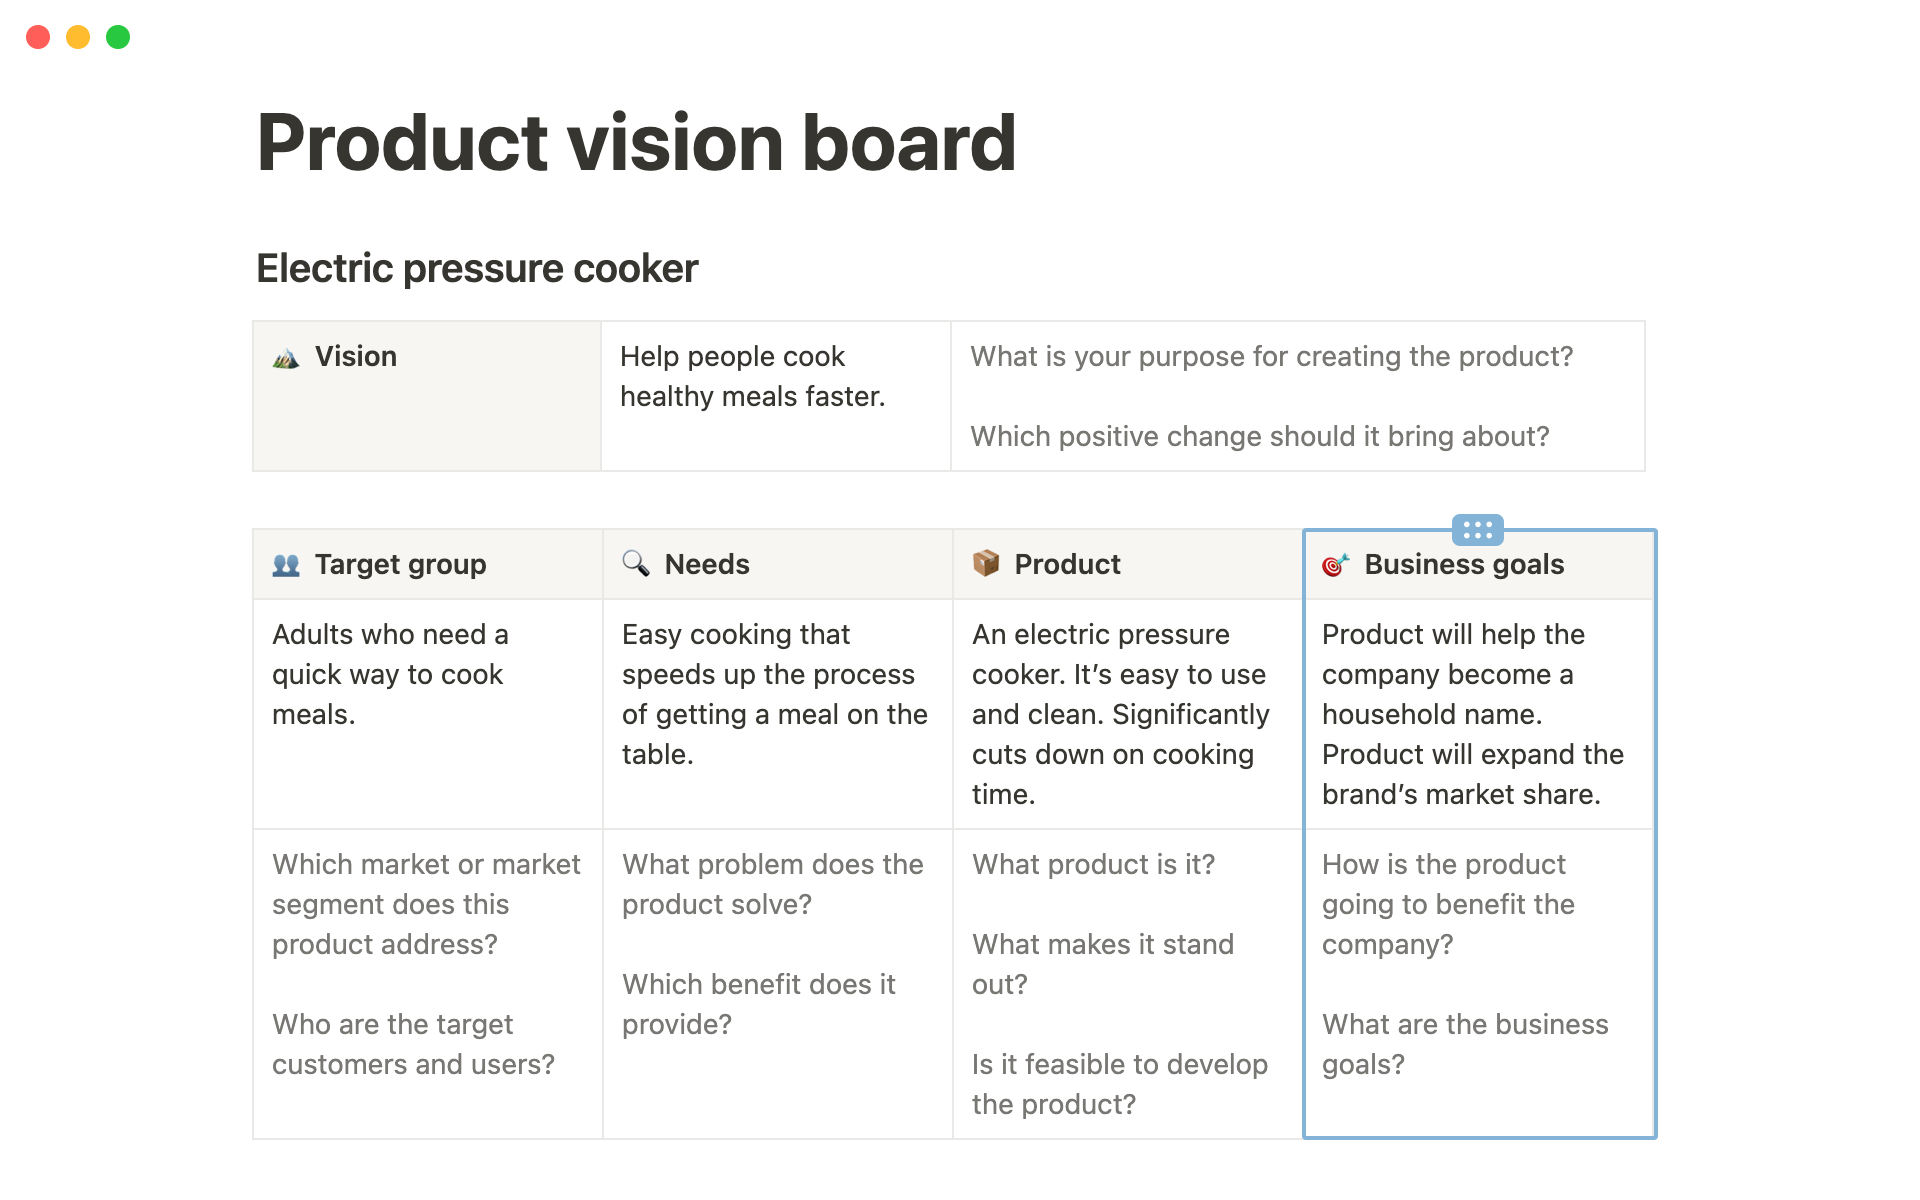 Organize all components of your product vision board in one place.